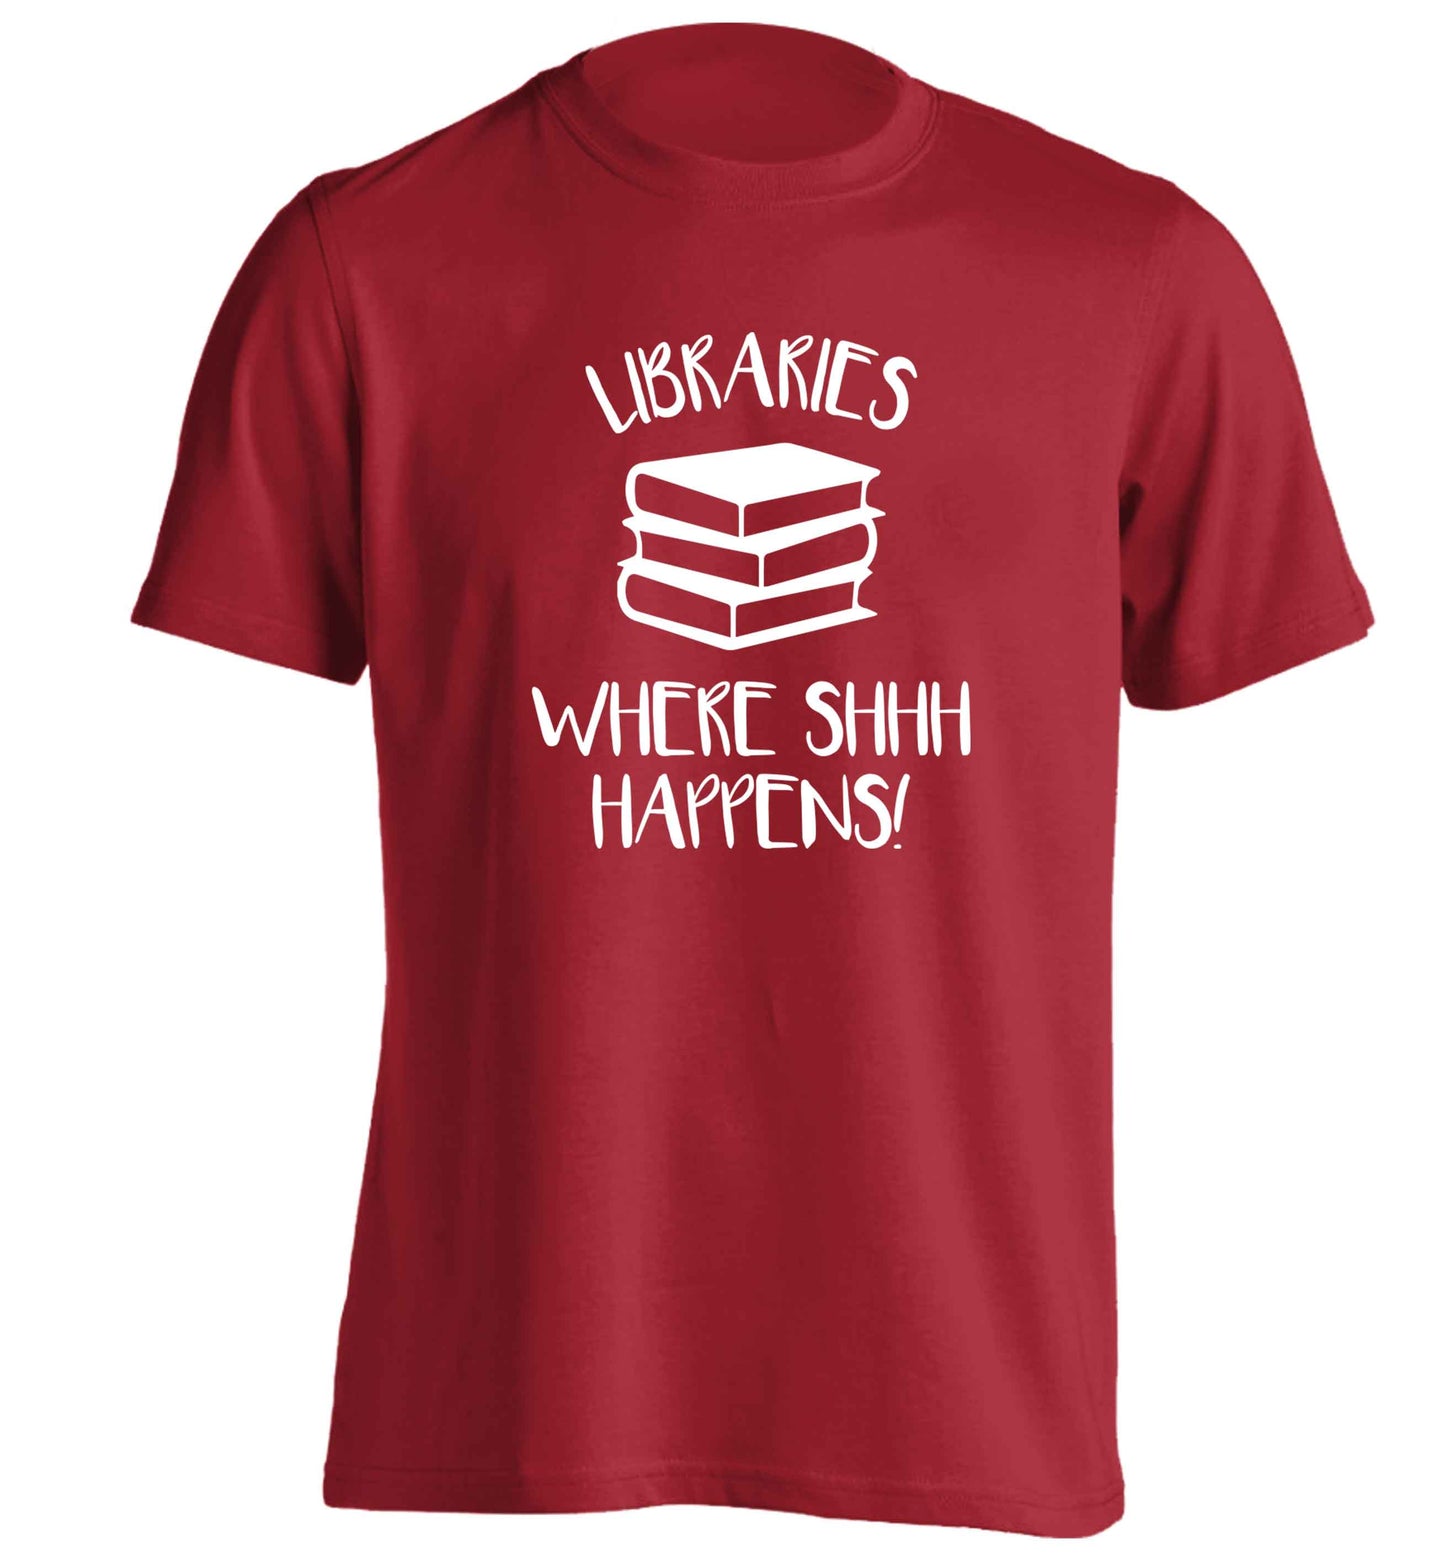 Libraries where shh happens! adults unisex red Tshirt 2XL